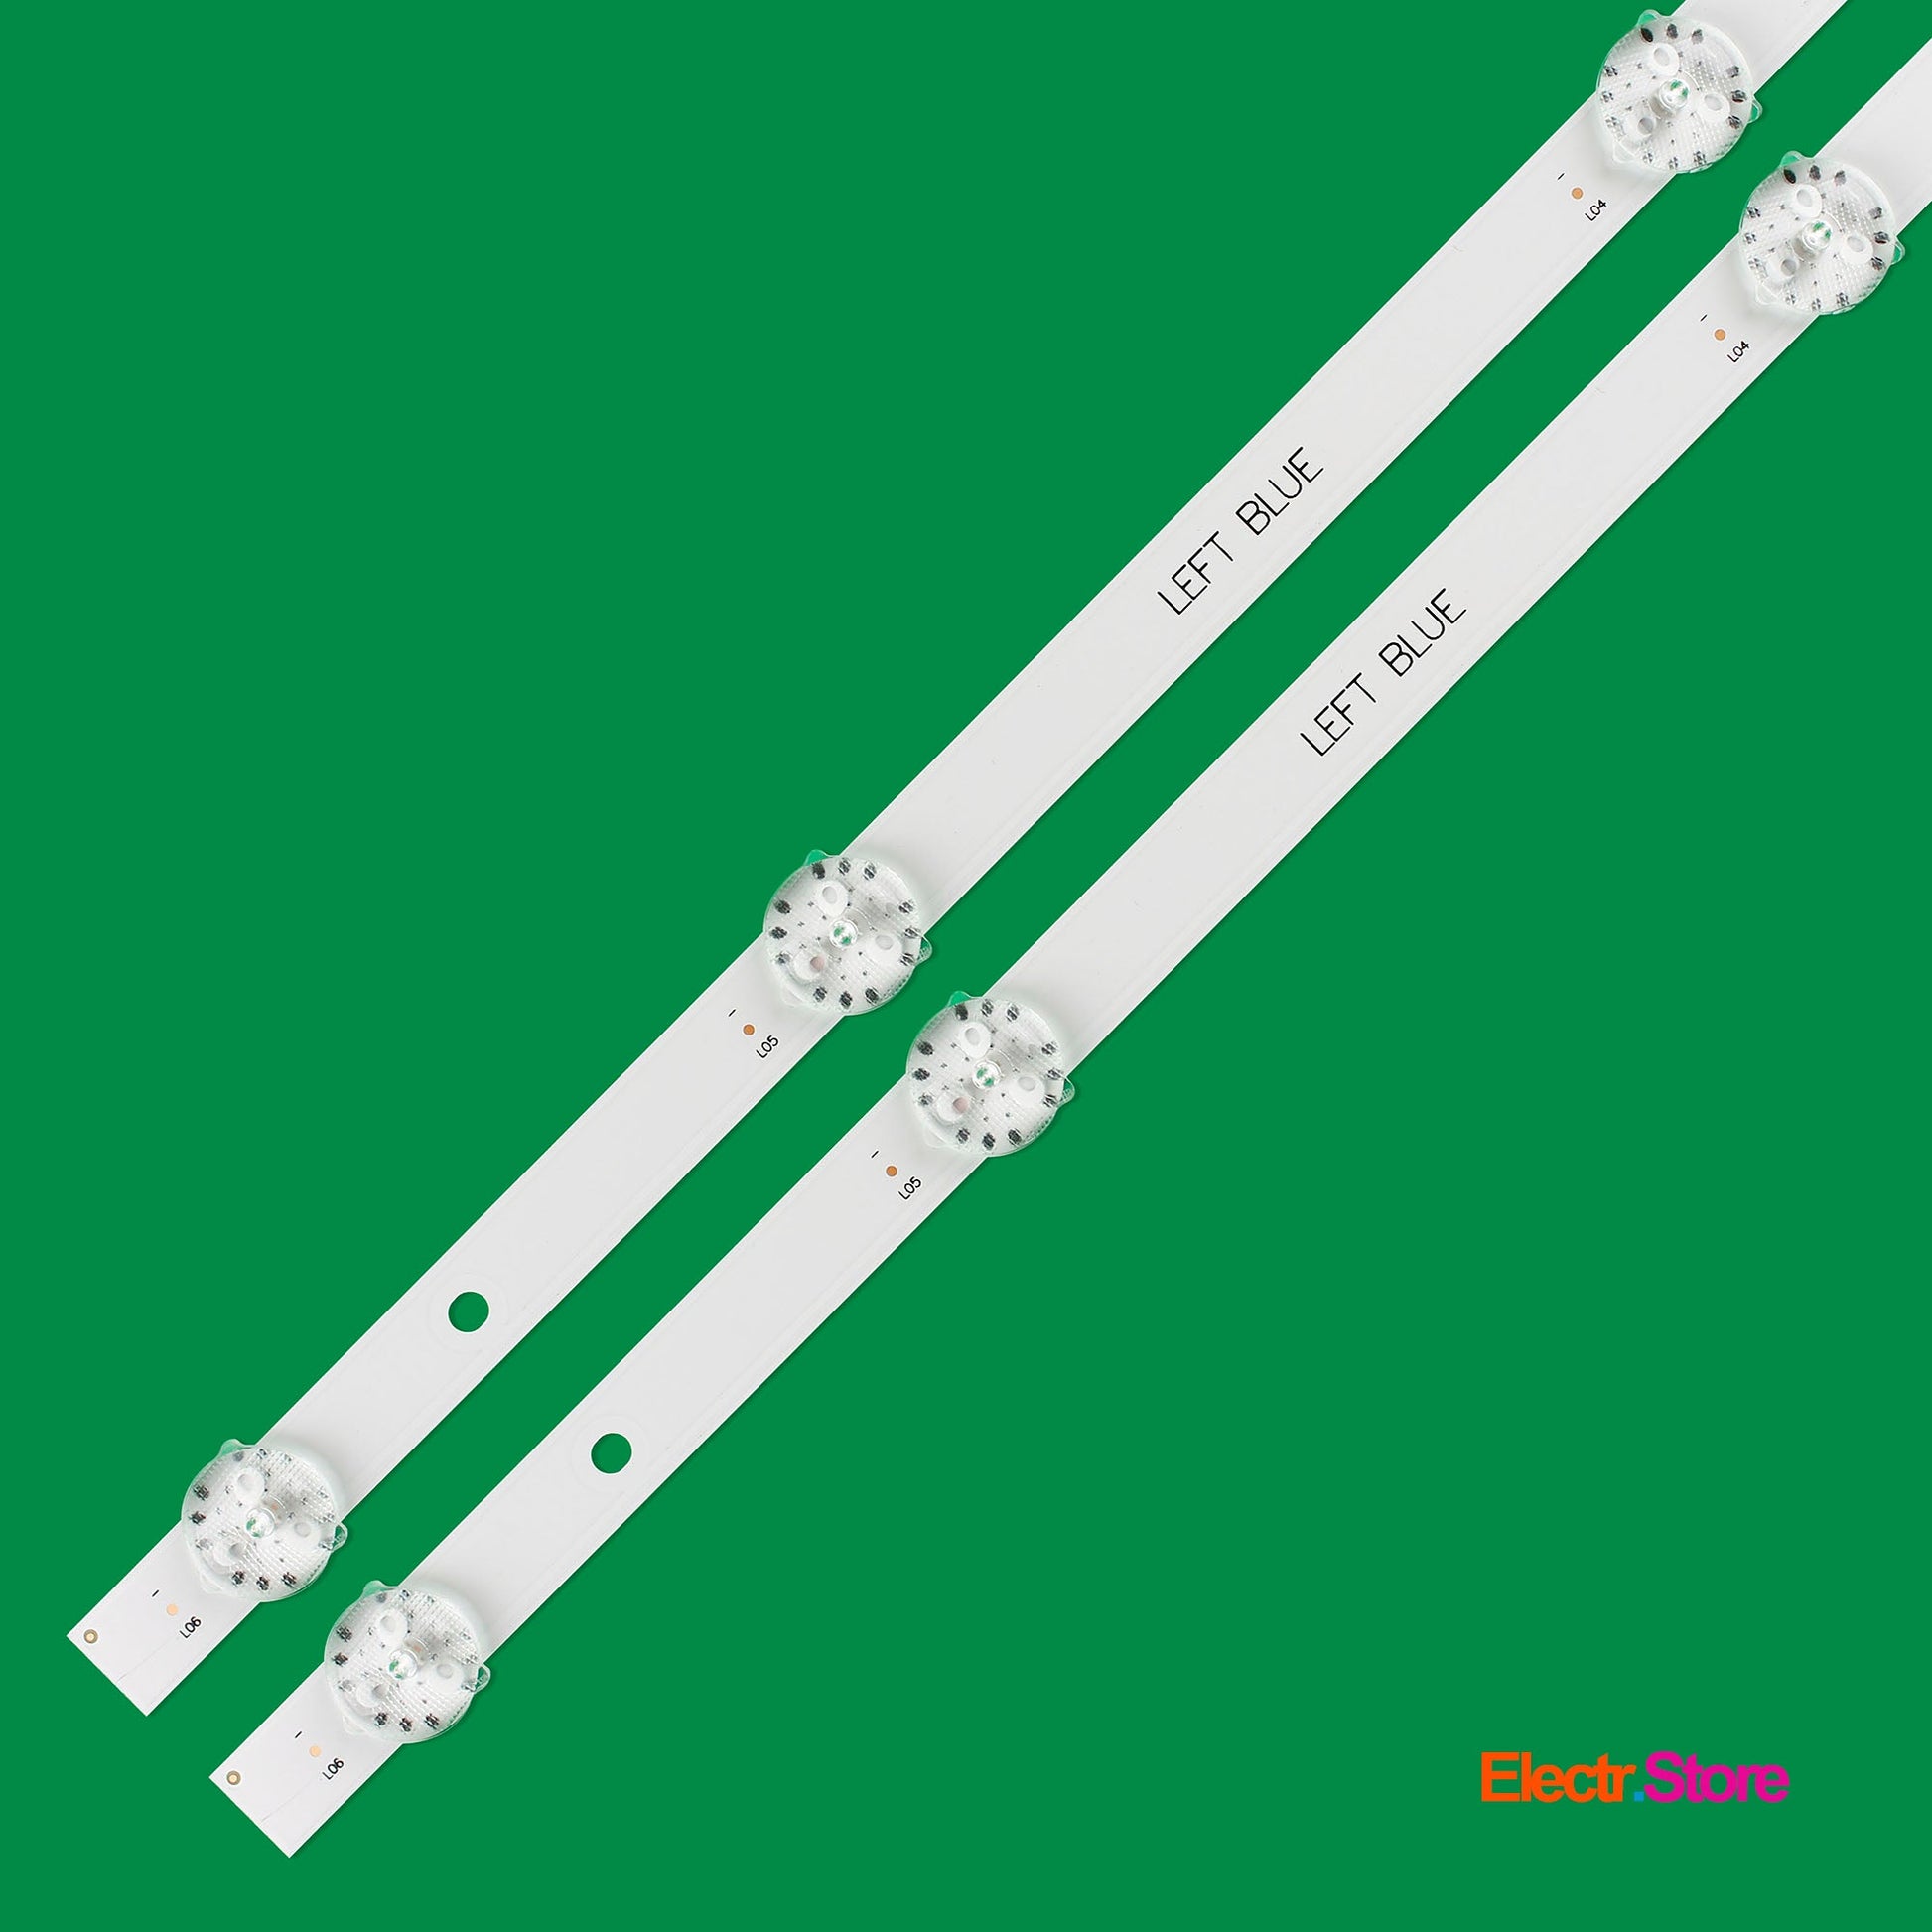 LED Backlight Strip Kits, JL.D32061330-057GS-M, JL.D32061330-004AS-M, 4C-LB320T-JF3/JF4 (2 pcs/kit), for TV 32" Panel: LVW320CSDX 32" JL.D32061330-057GS-M LED Backlights Multi Others TCL THOMSON Whaley Electr.Store